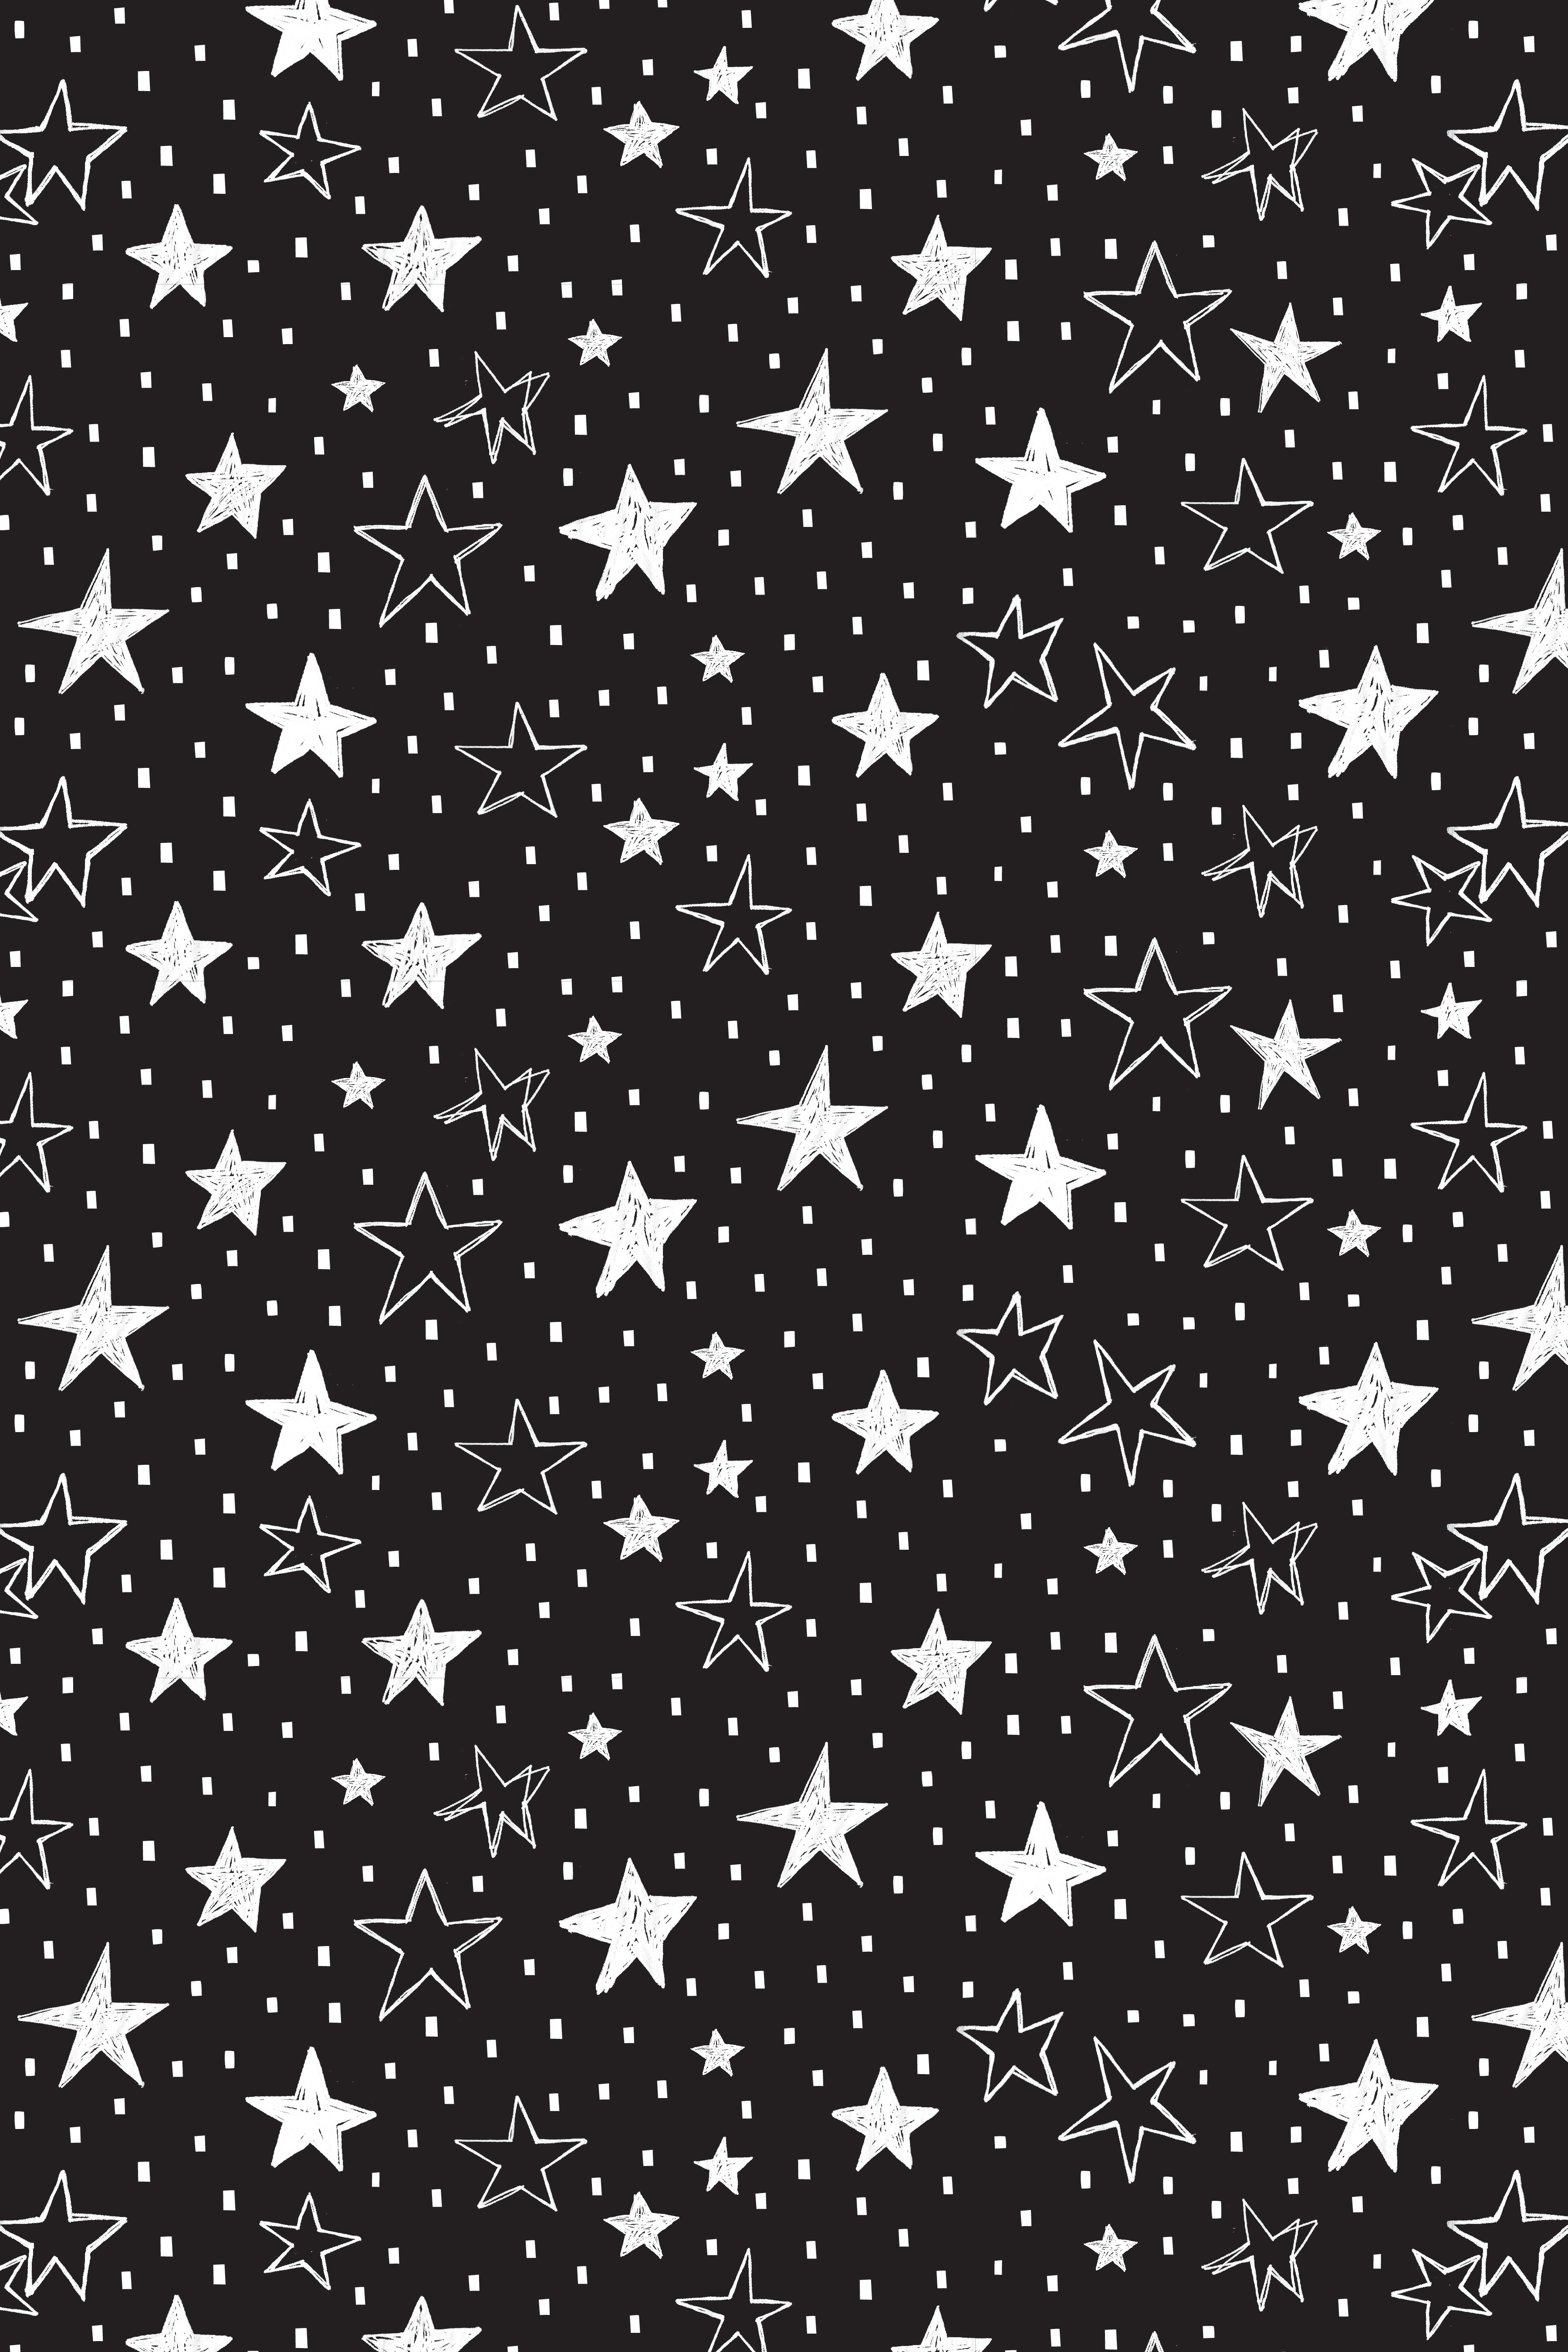 Aesthetic Star Pattern Wrapping Paper Sheets